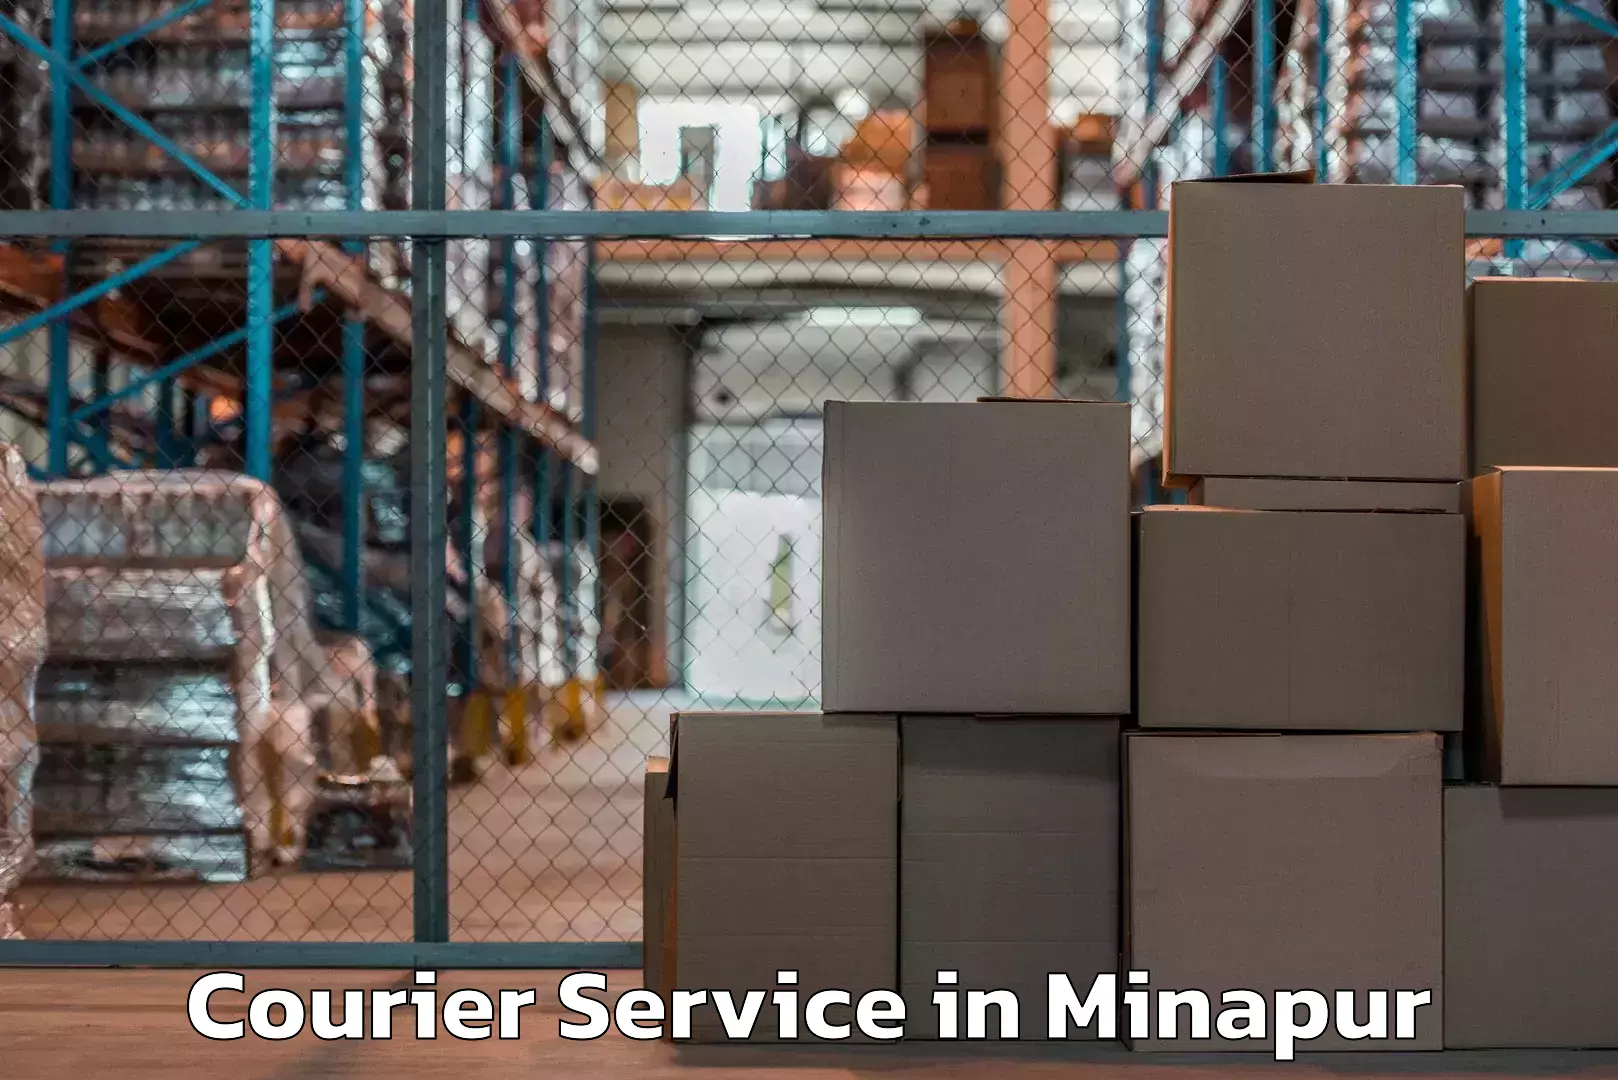 Enhanced delivery experience in Minapur